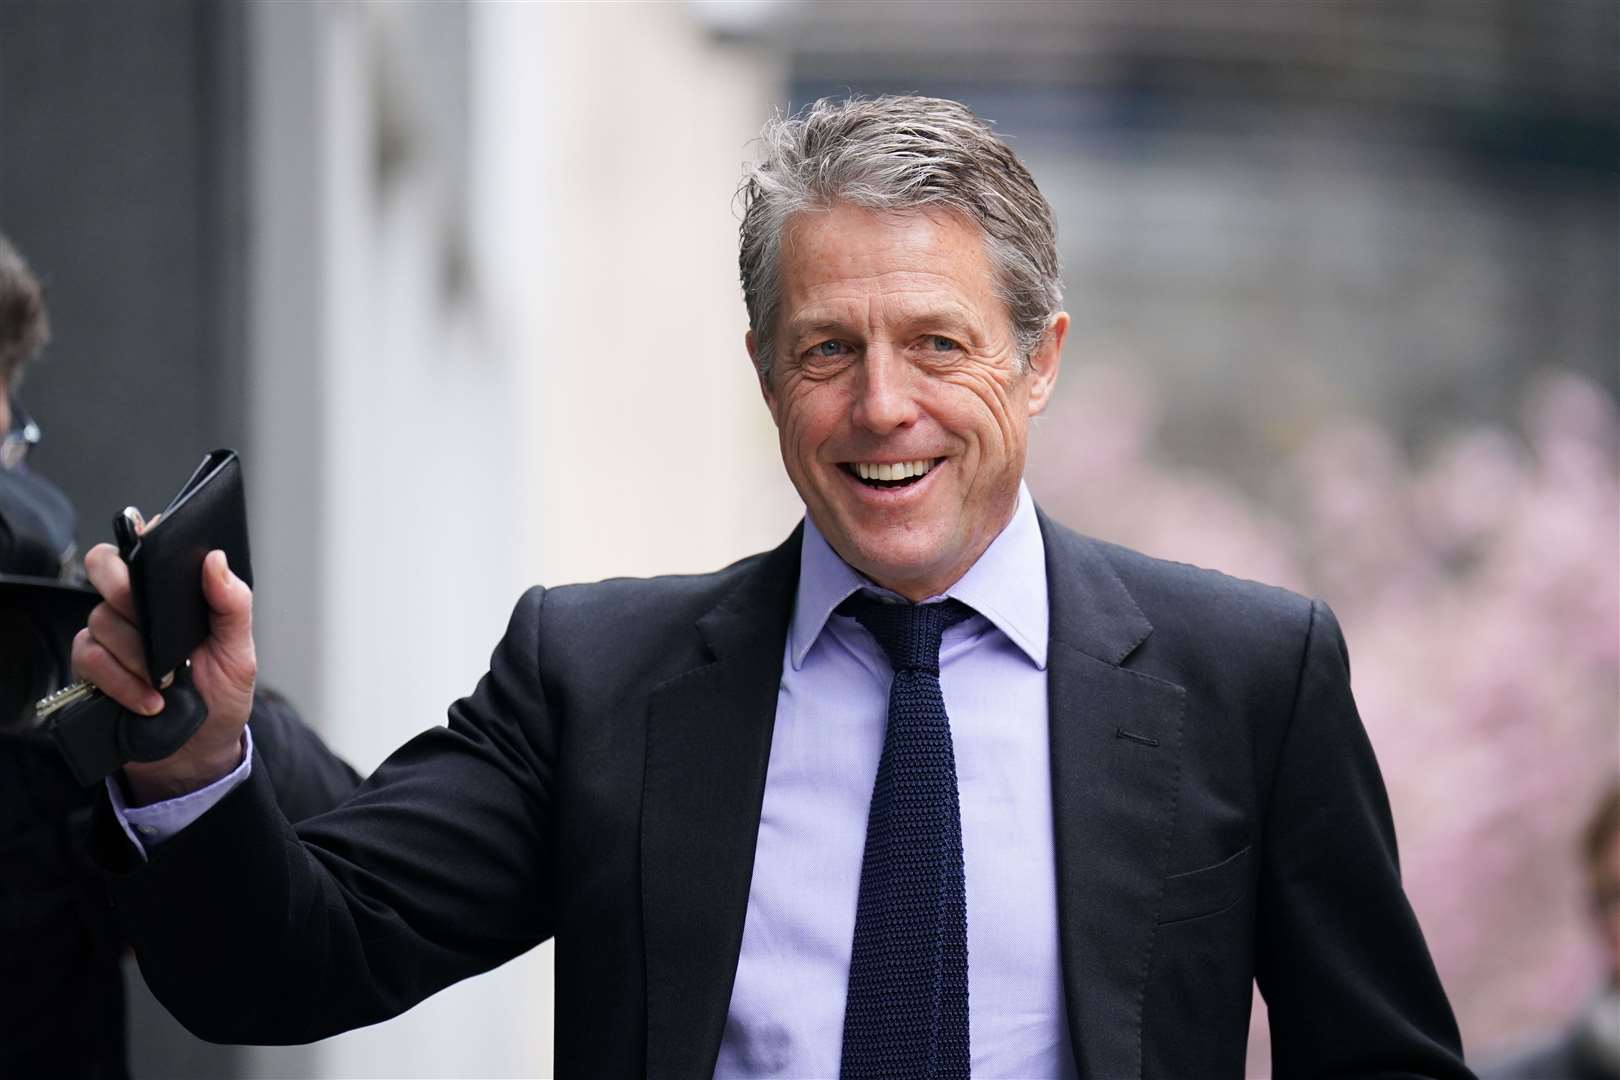 Hugh Grant is joining Harry in suing News Group Newspapers over allegations of unlawful information-gathering (James Manning/PA)